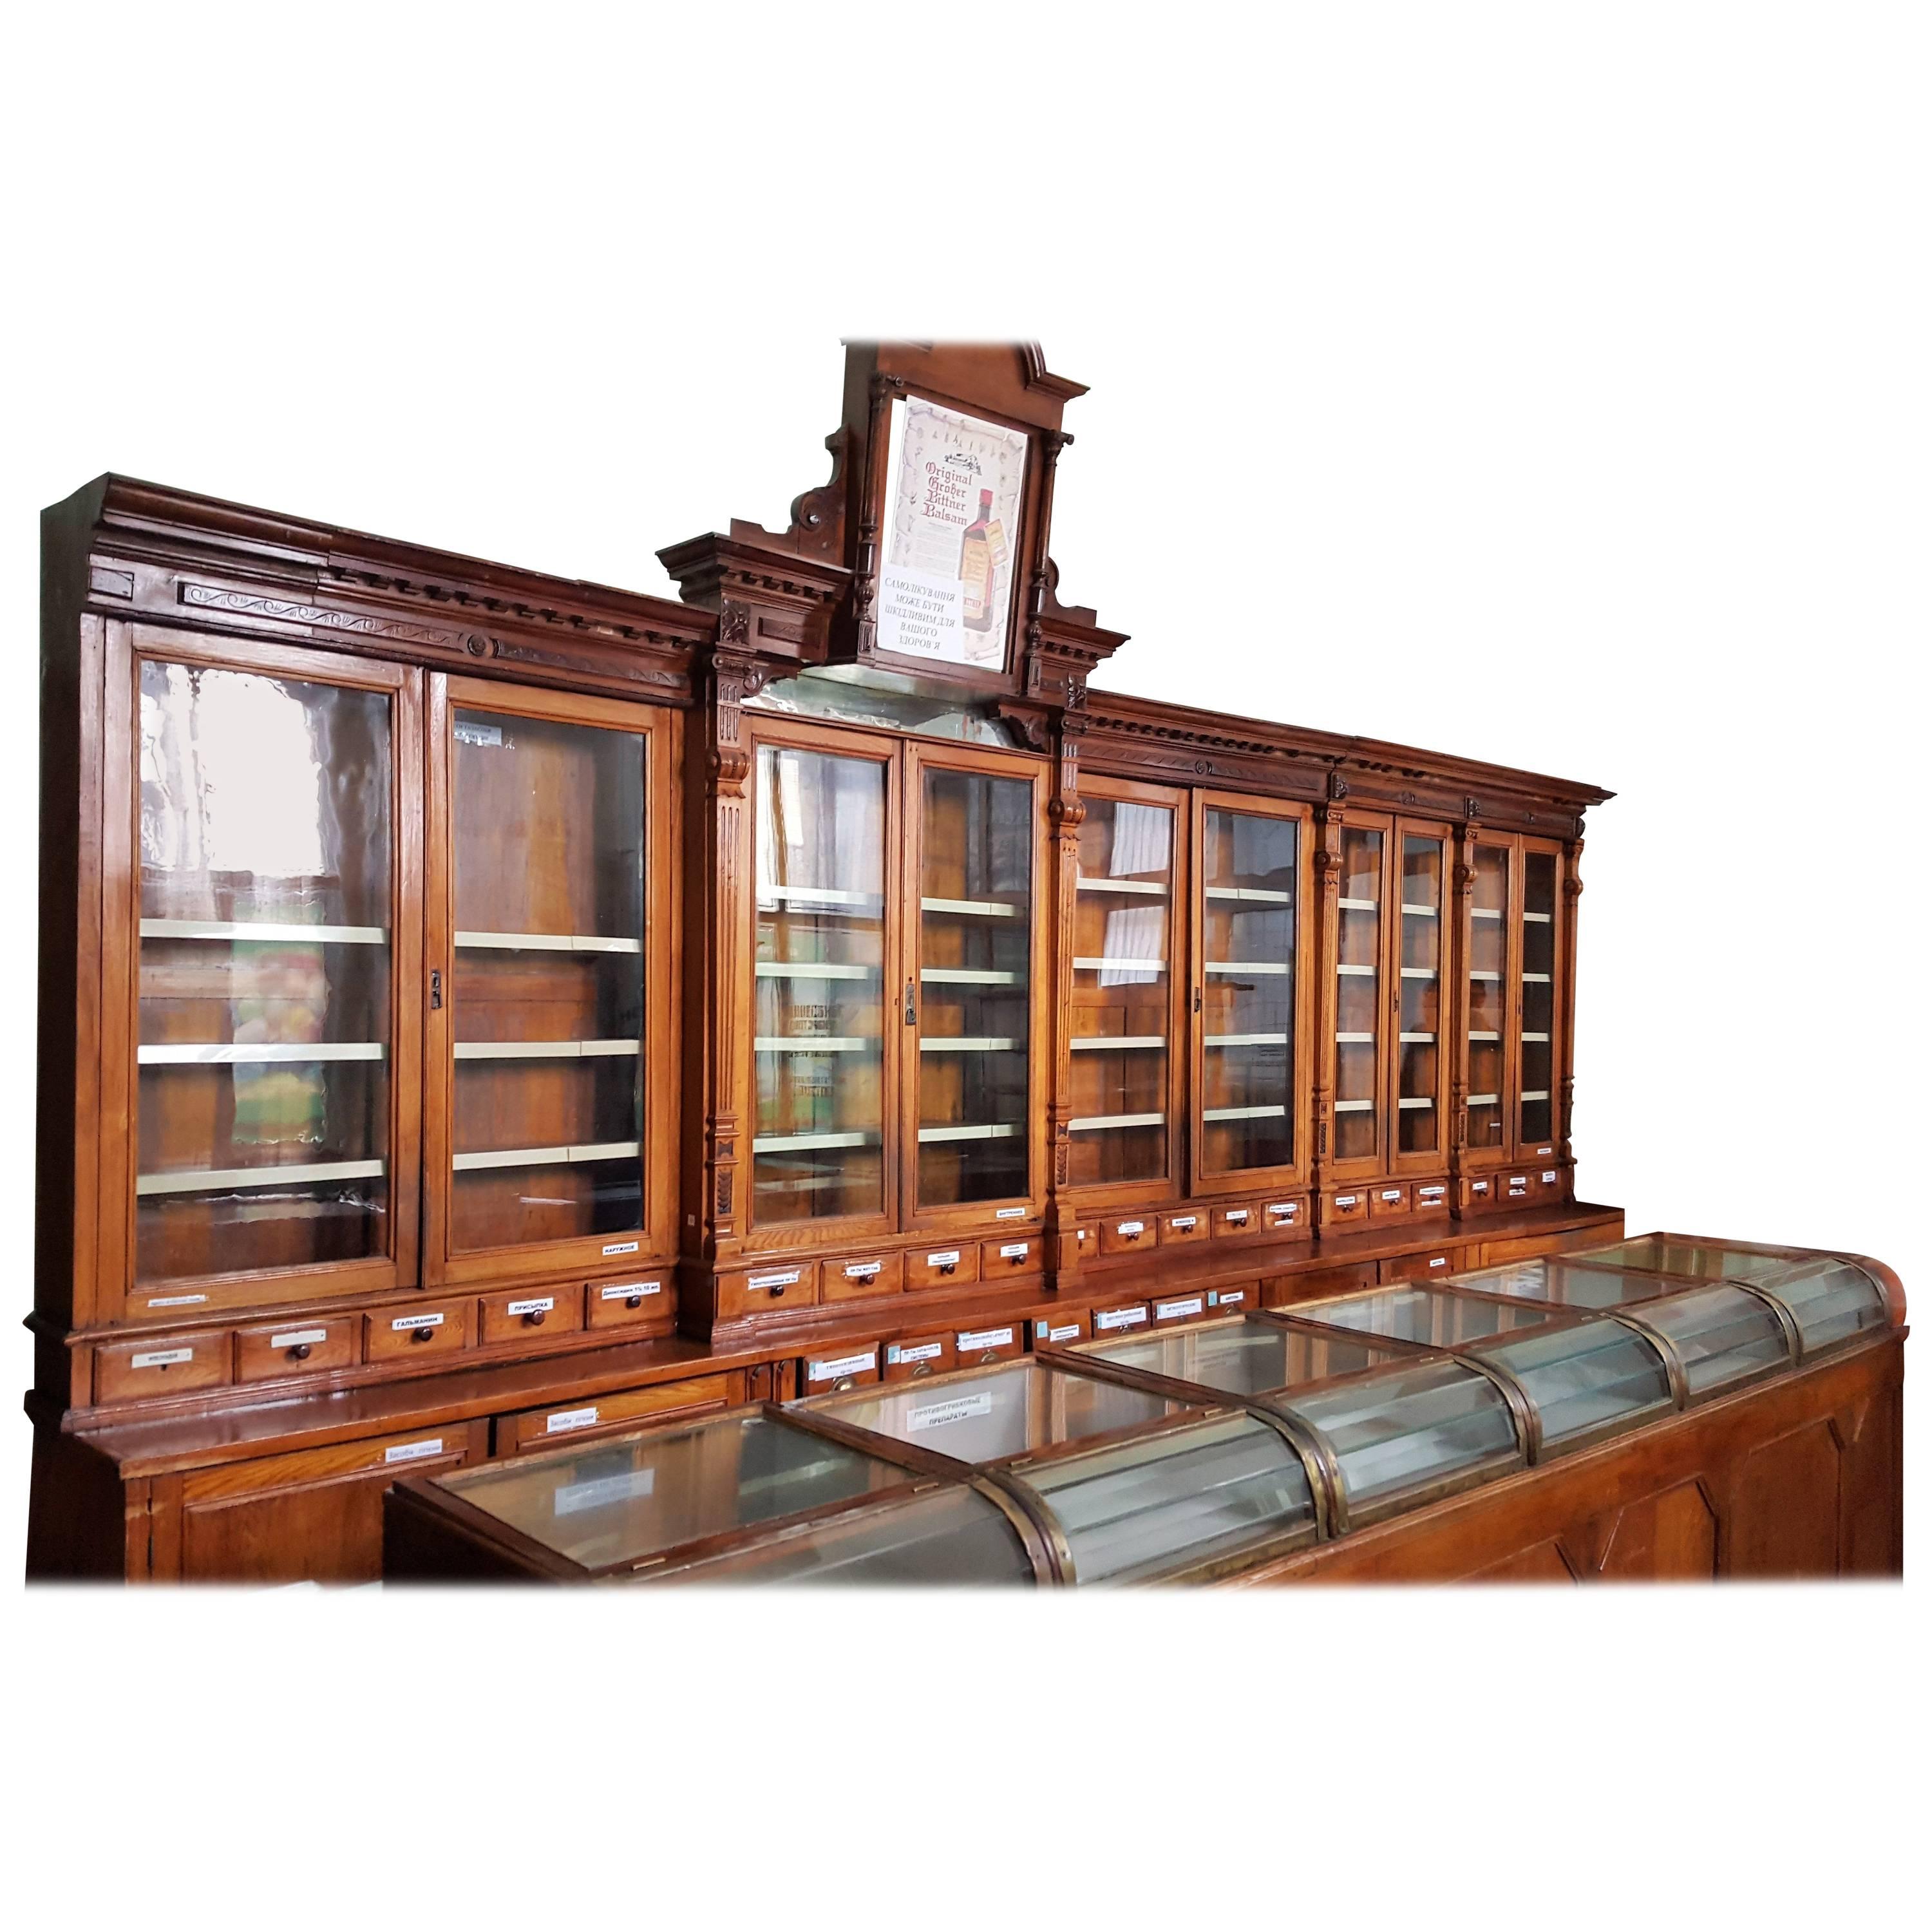 Late 19th Century Chemist Shop, Apothecary Interior For Sale